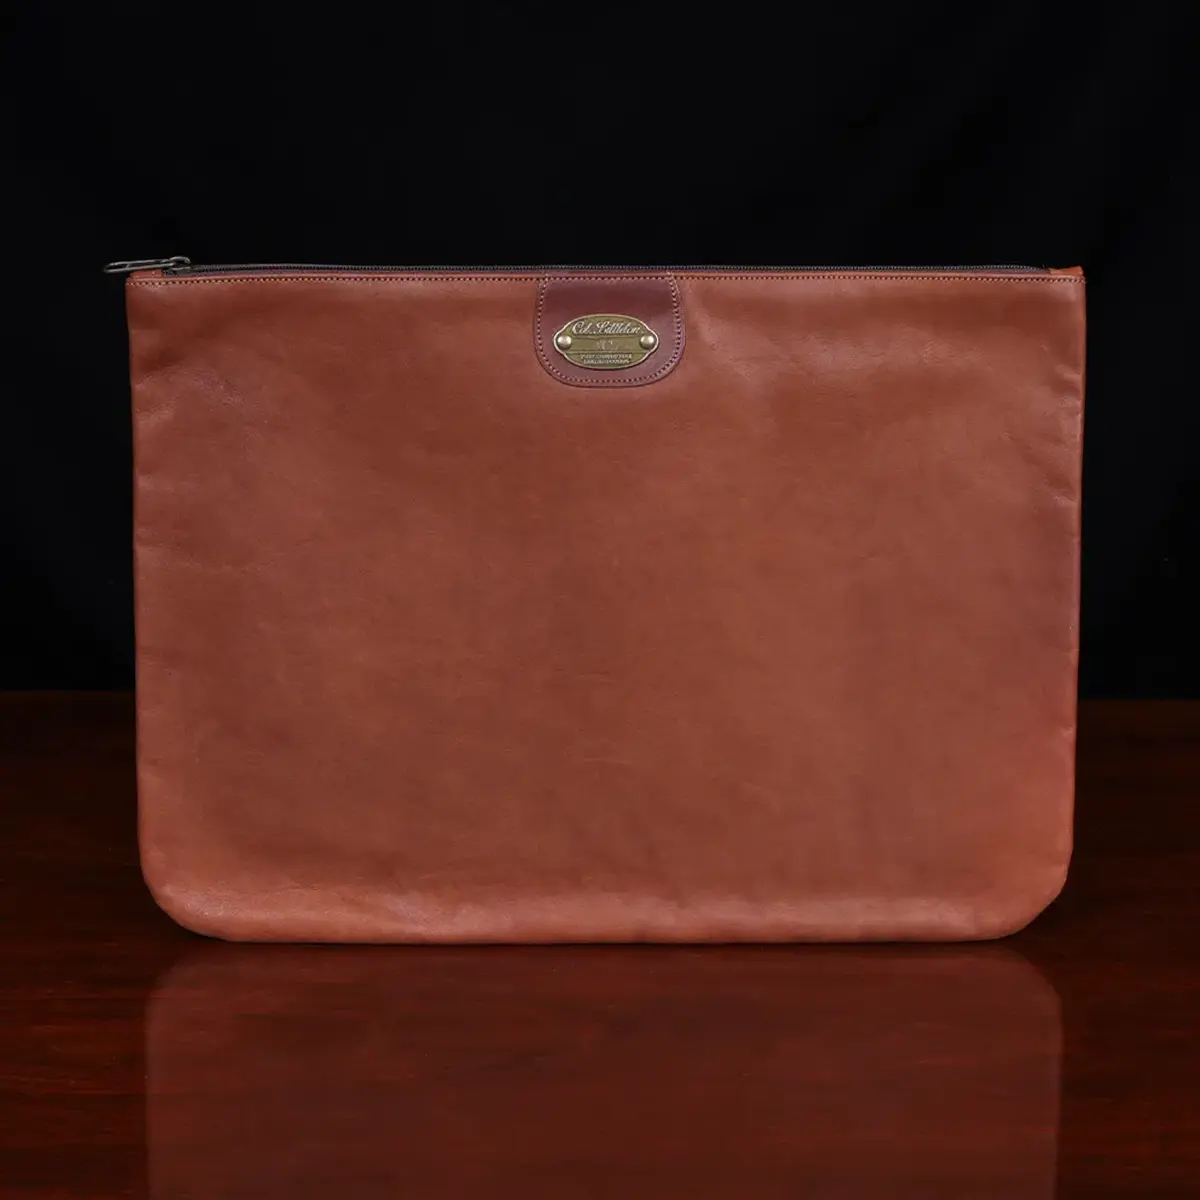 no3 brown leather large zip it bag - front view - on wooden table